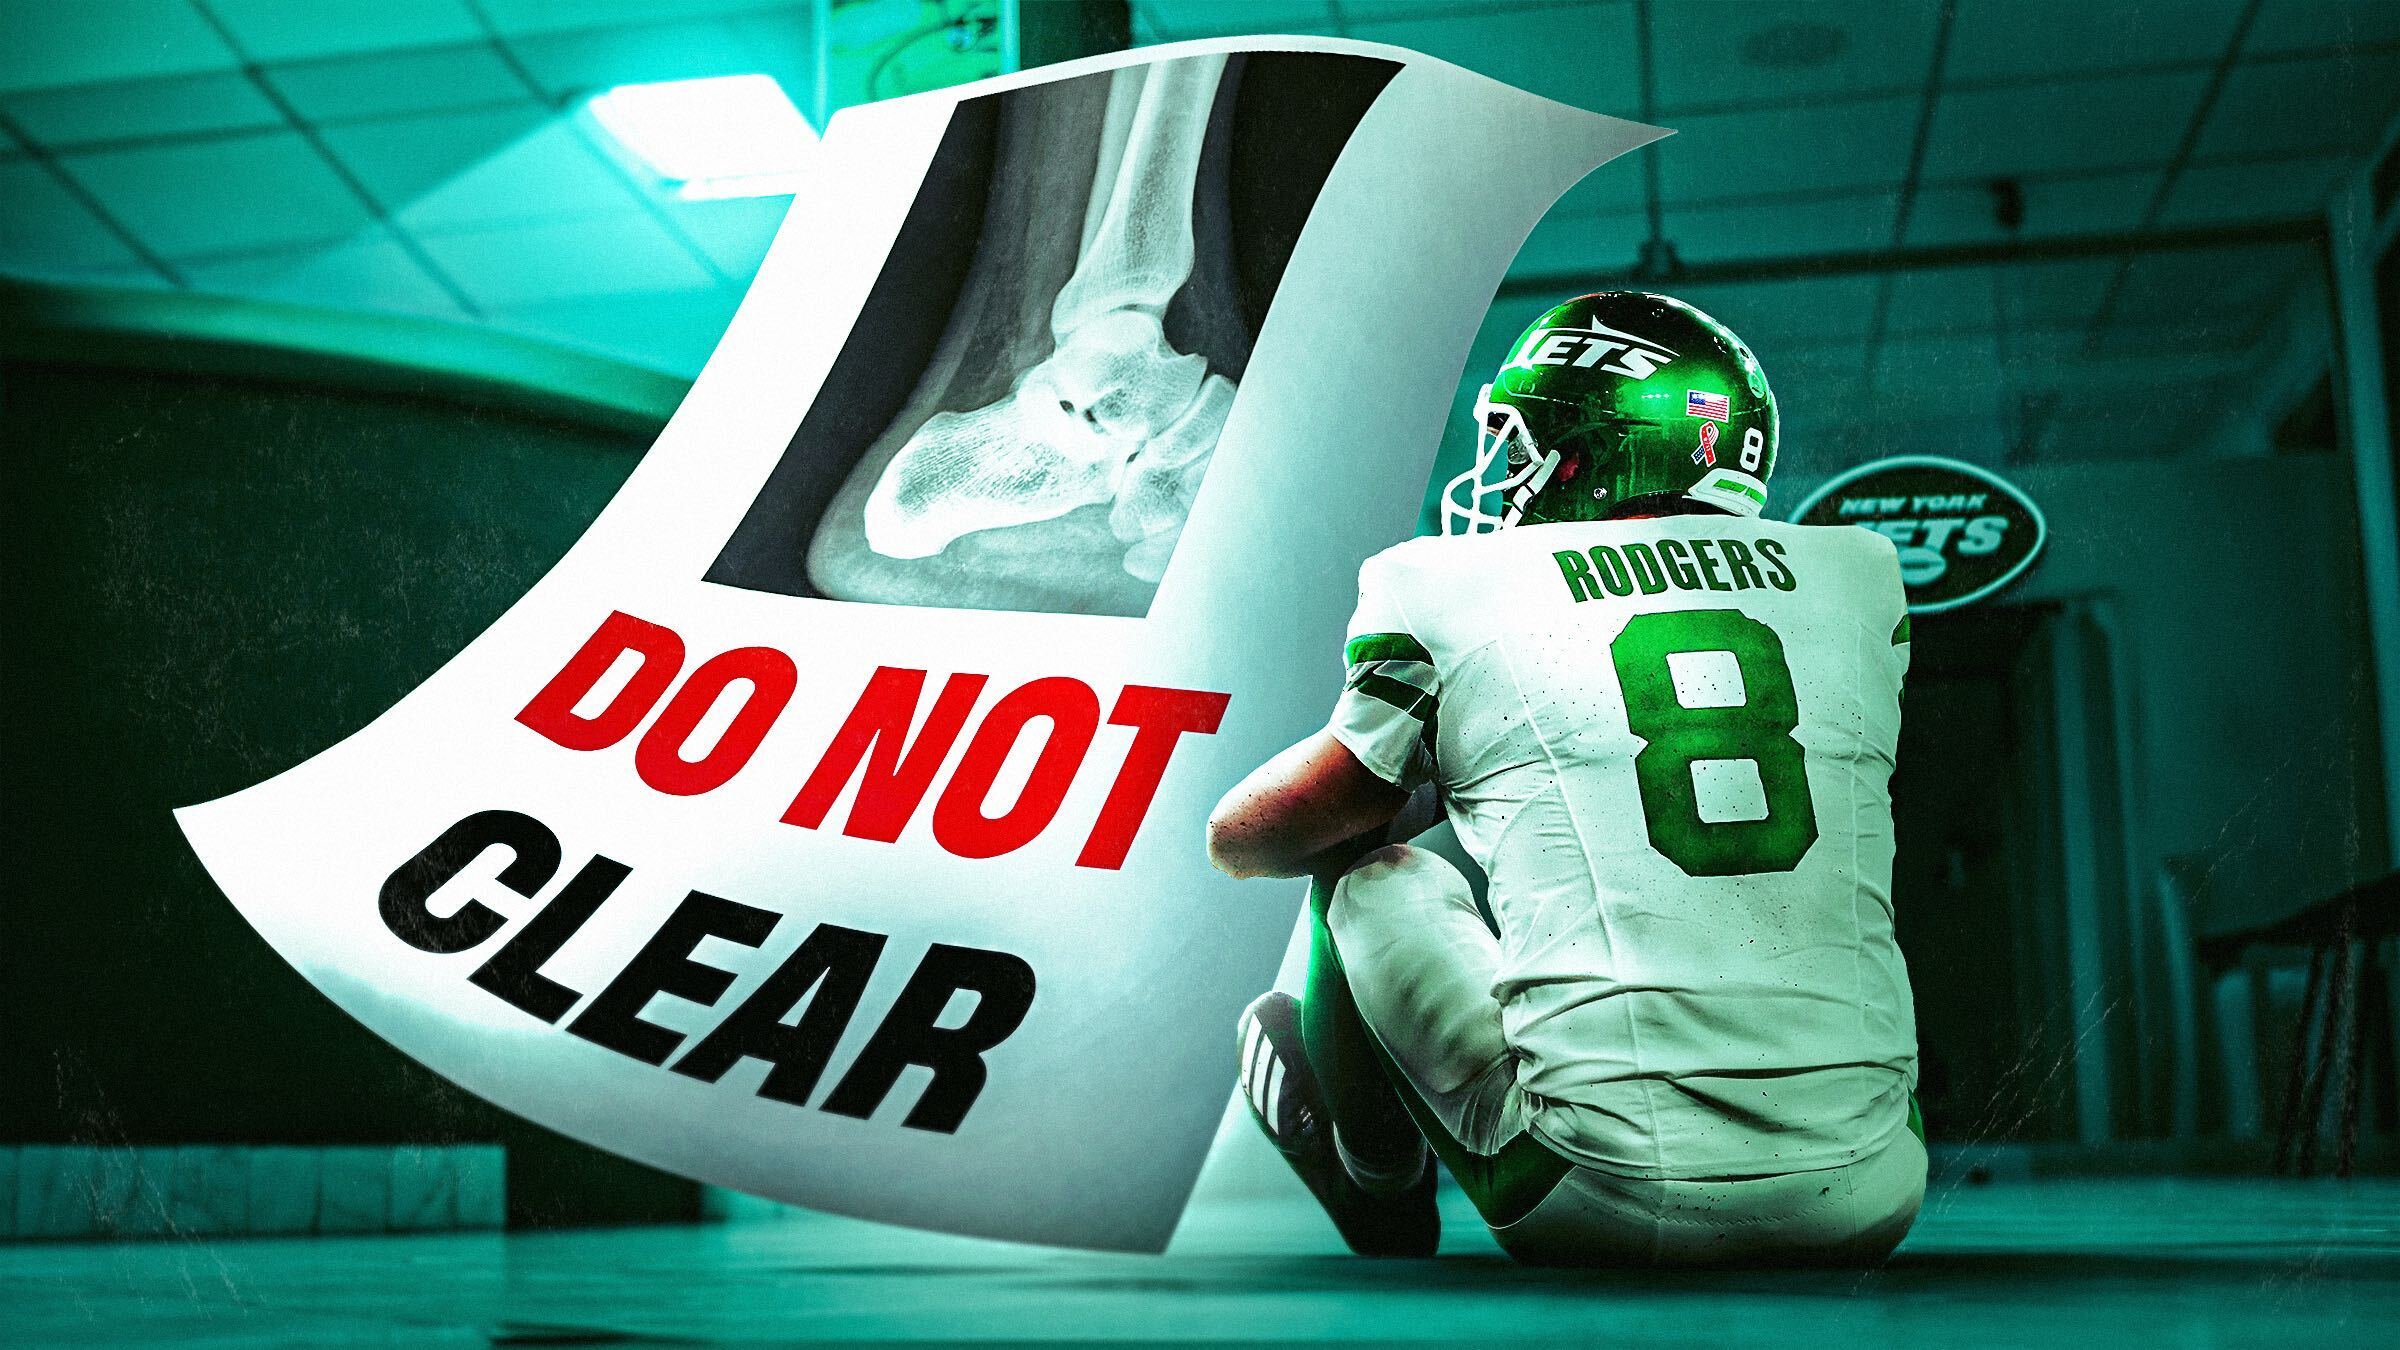 Blue-green background with Aaron Rodgers sitting in front of a sign that has an X-ray and the text "do not clear"